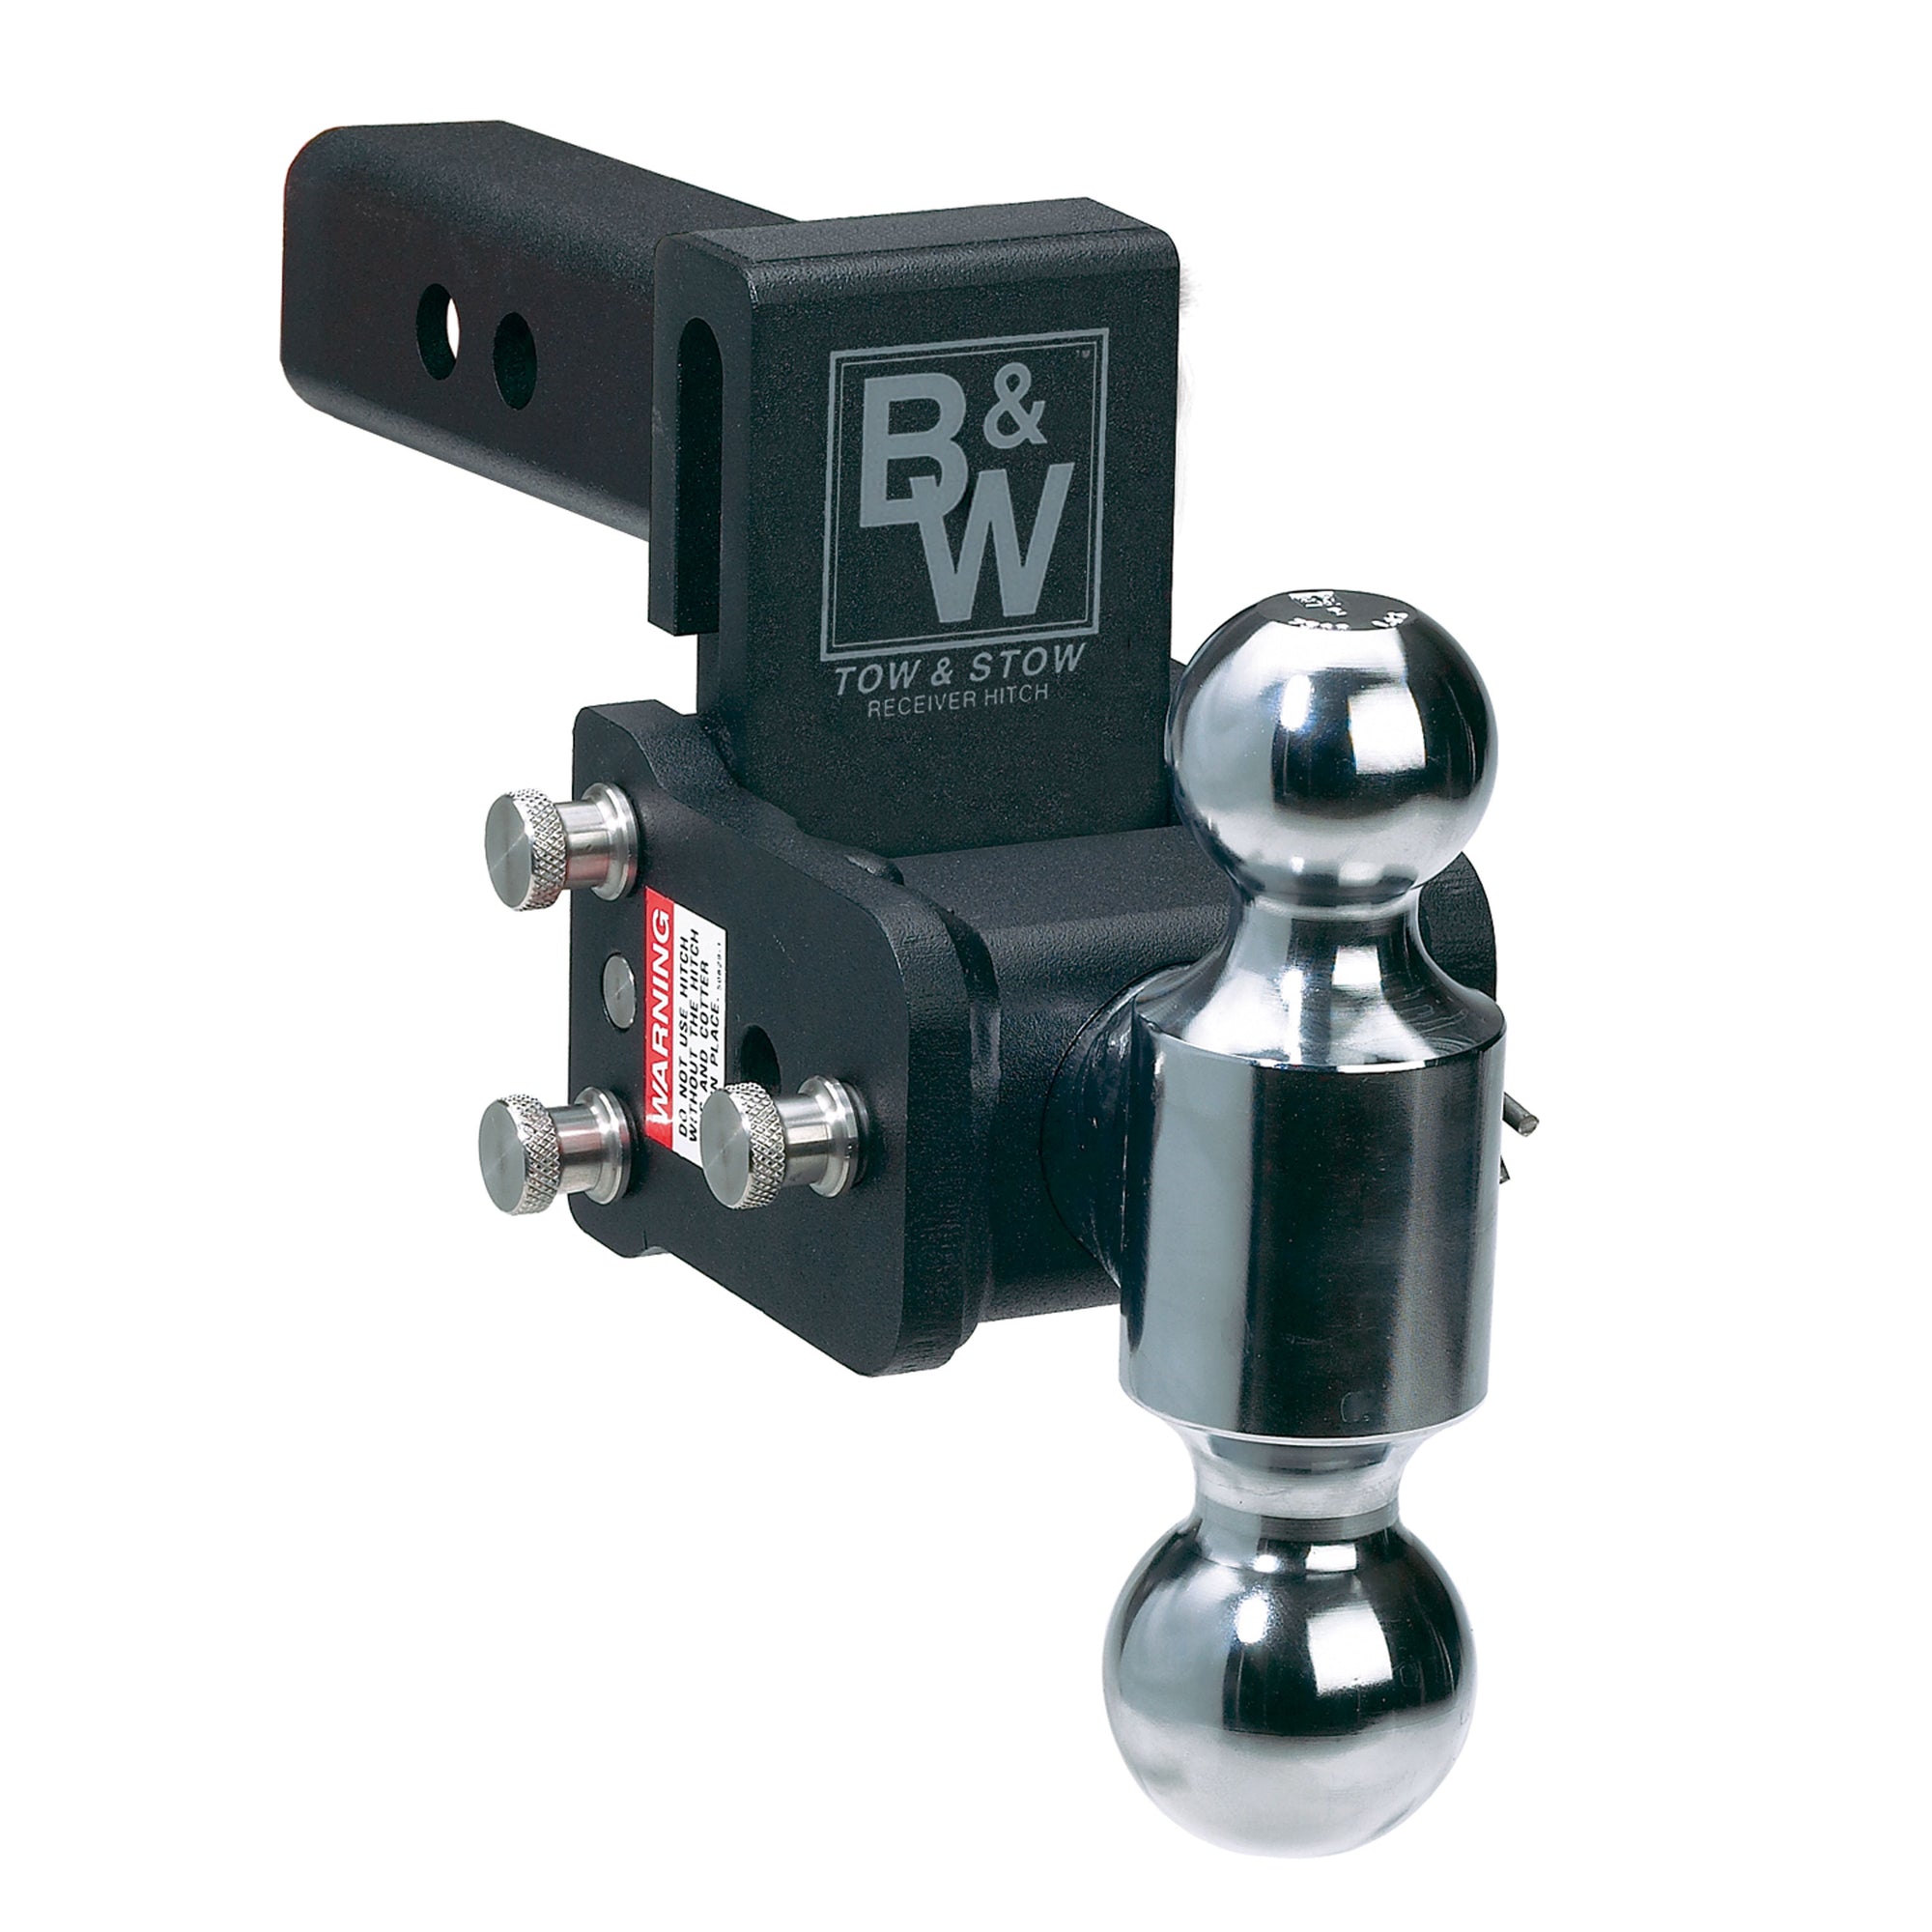 B&W Trailer Hitches TS10038B Tow and Stow Adjustable Ball Mount - 1-7/8" & 2" Ball, 5" Drop, 5.5" Rise, Black